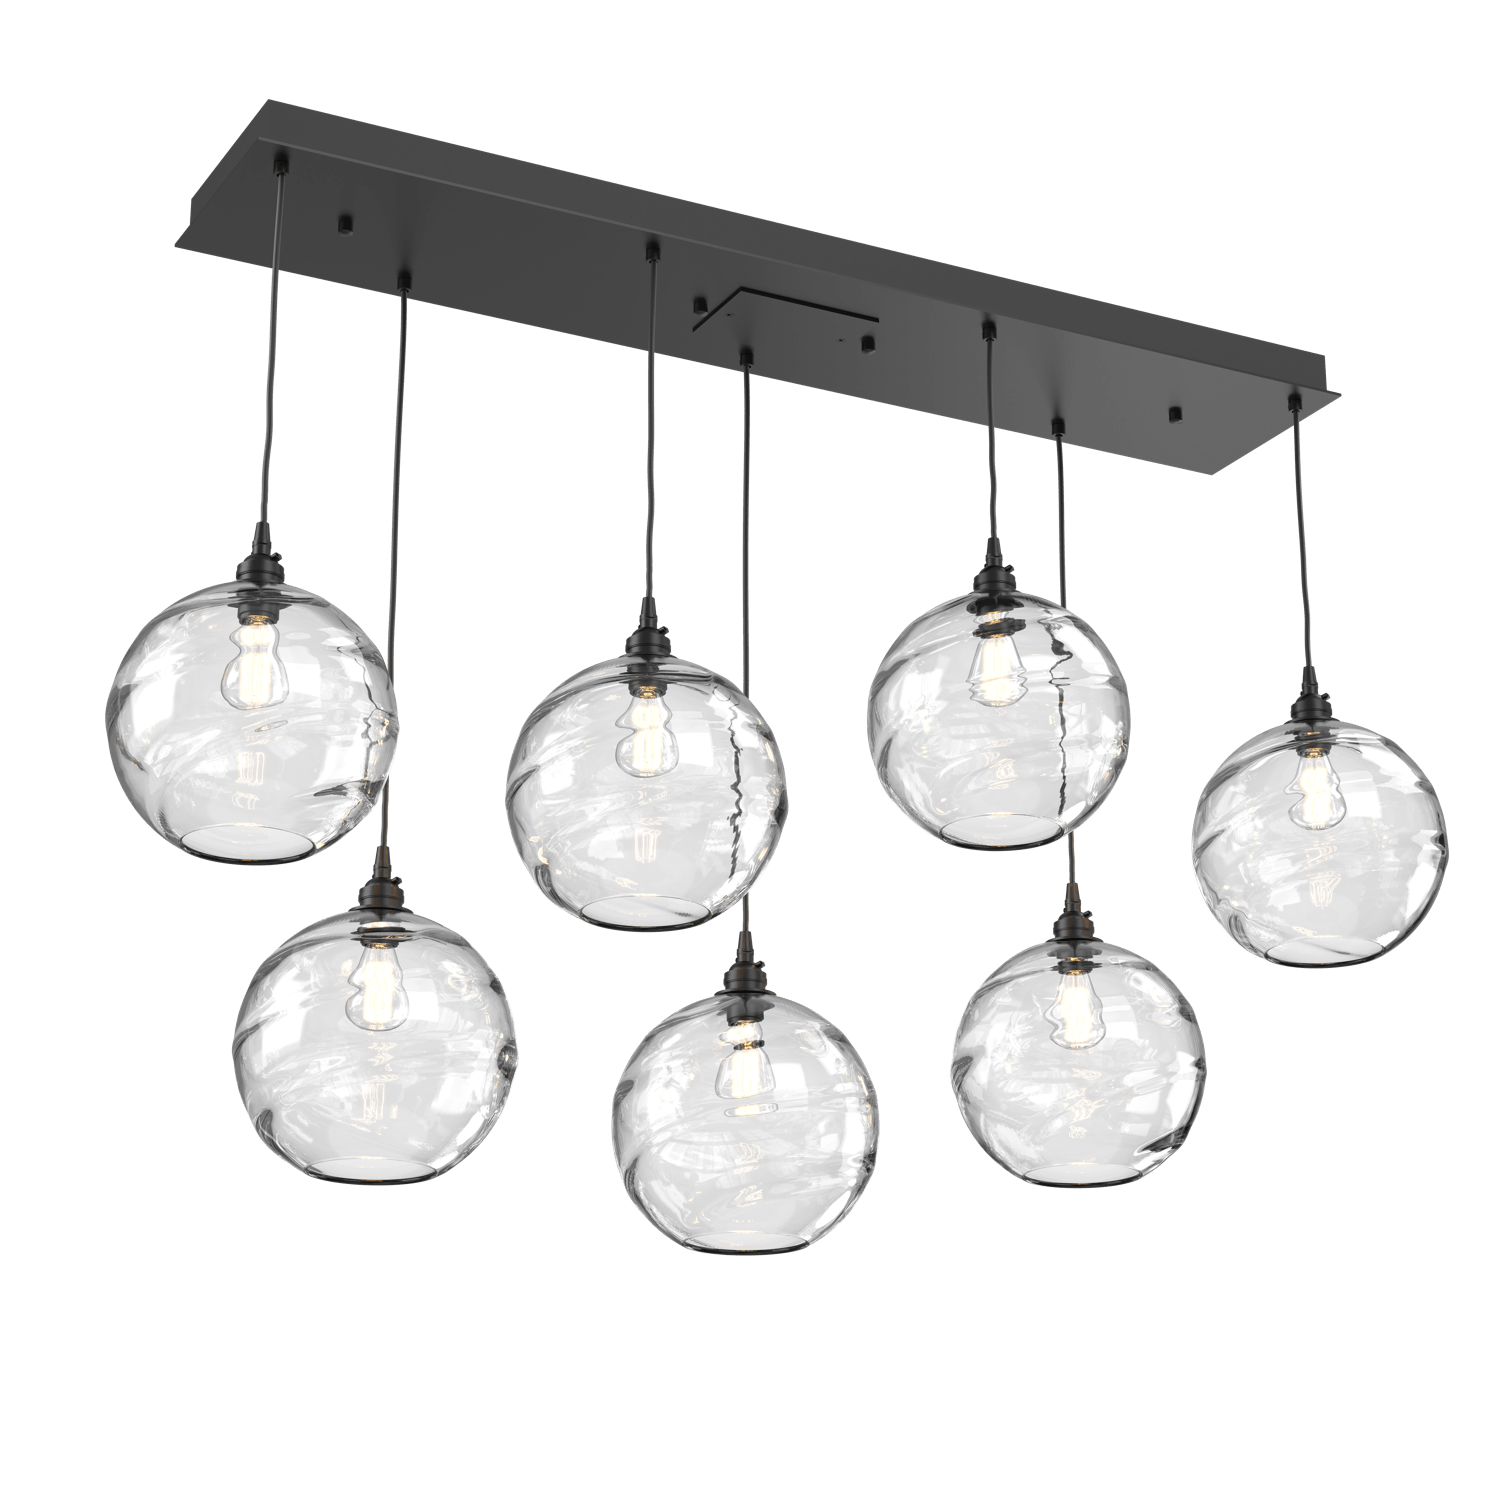 PLB0047-07-MB-OC-Hammerton-Studio-Optic-Blown-Glass-Terra-7-light-linear-pendant-chandelier-with-matte-black-finish-and-optic-clear-blown-glass-shades-and-incandescent-lamping